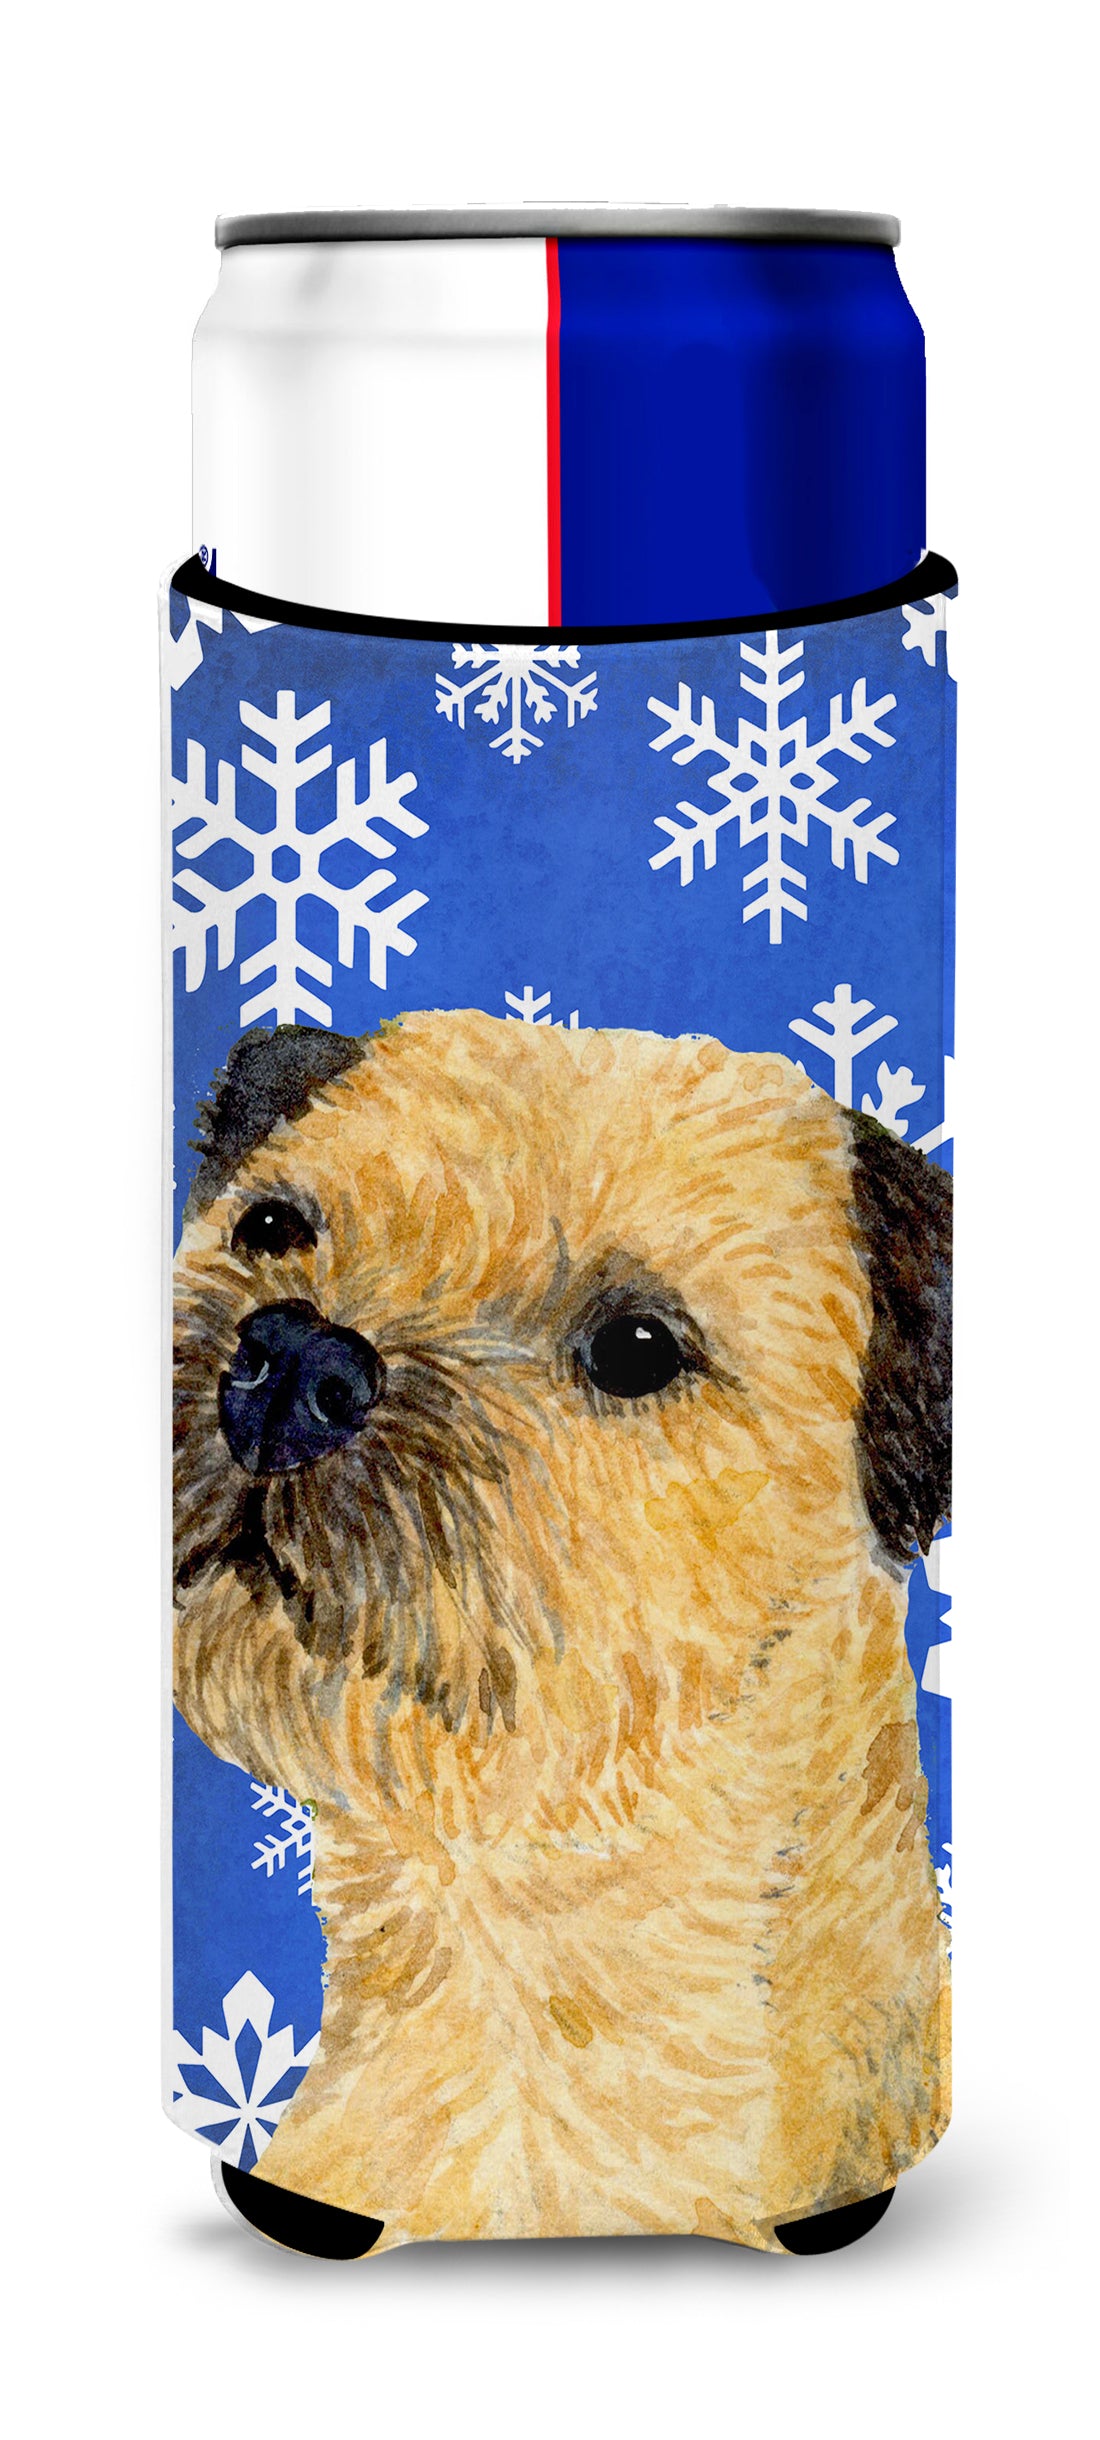 Border Terrier Winter Snowflakes Holiday Ultra Beverage Insulators for slim cans LH9278MUK.